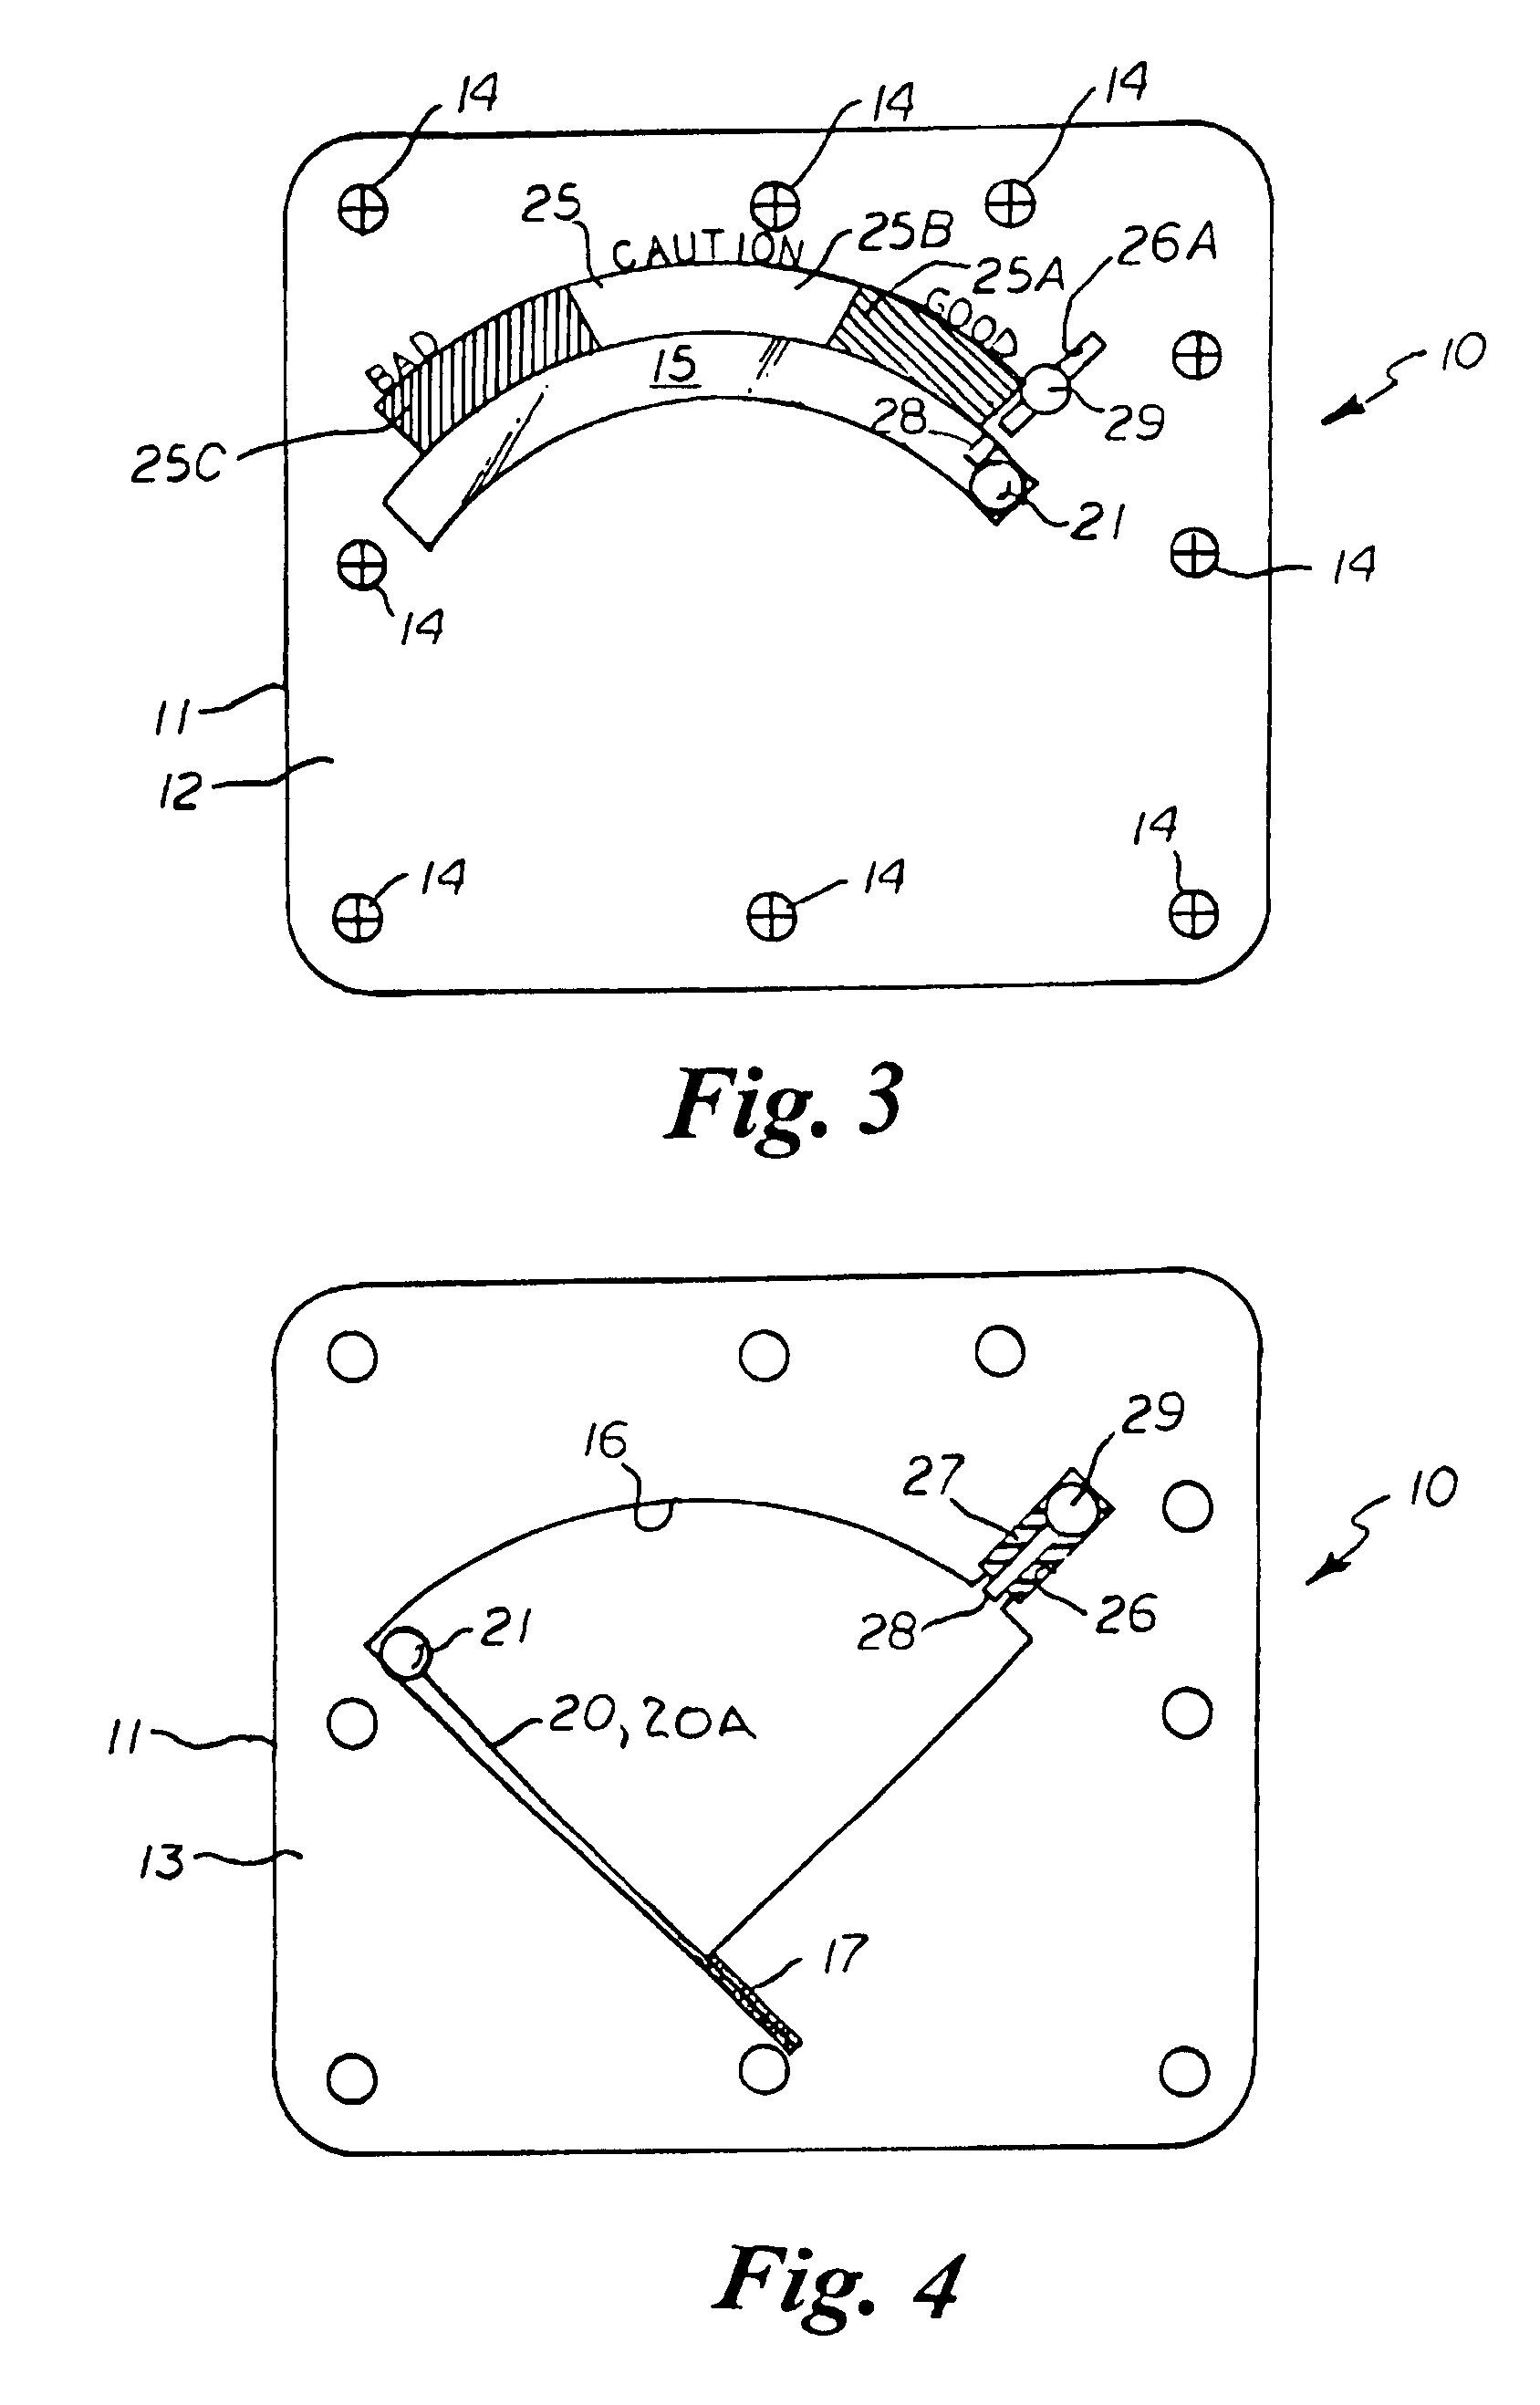 Remote indicating cumulative thermal exposure monitor and system for reading same